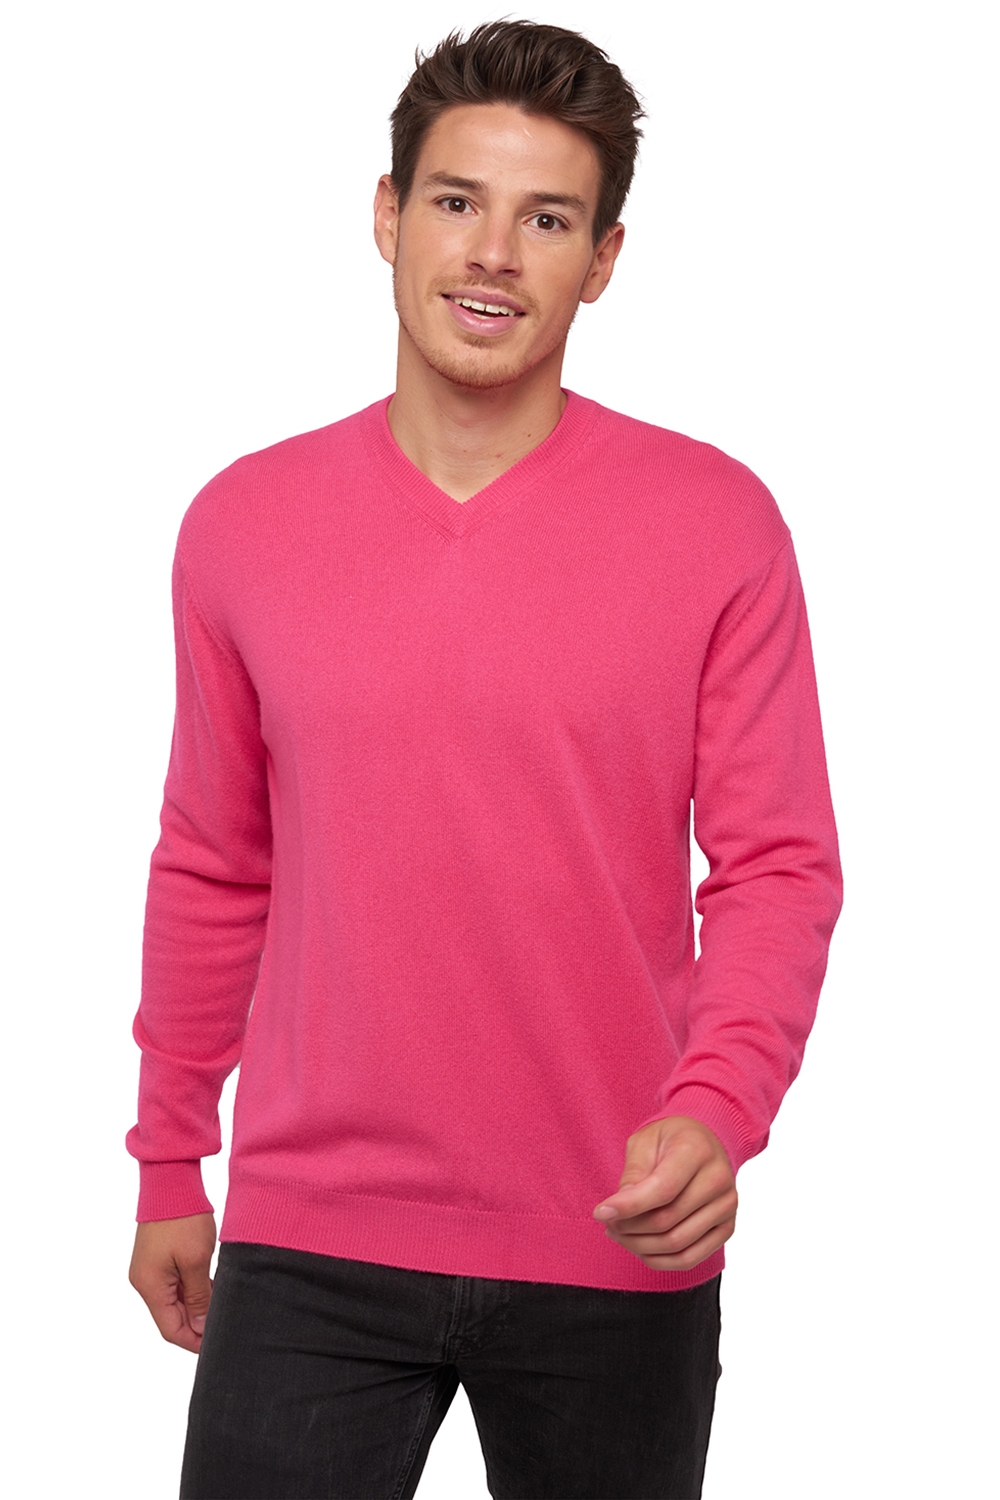 Cachemire pull homme gaspard rose shocking m